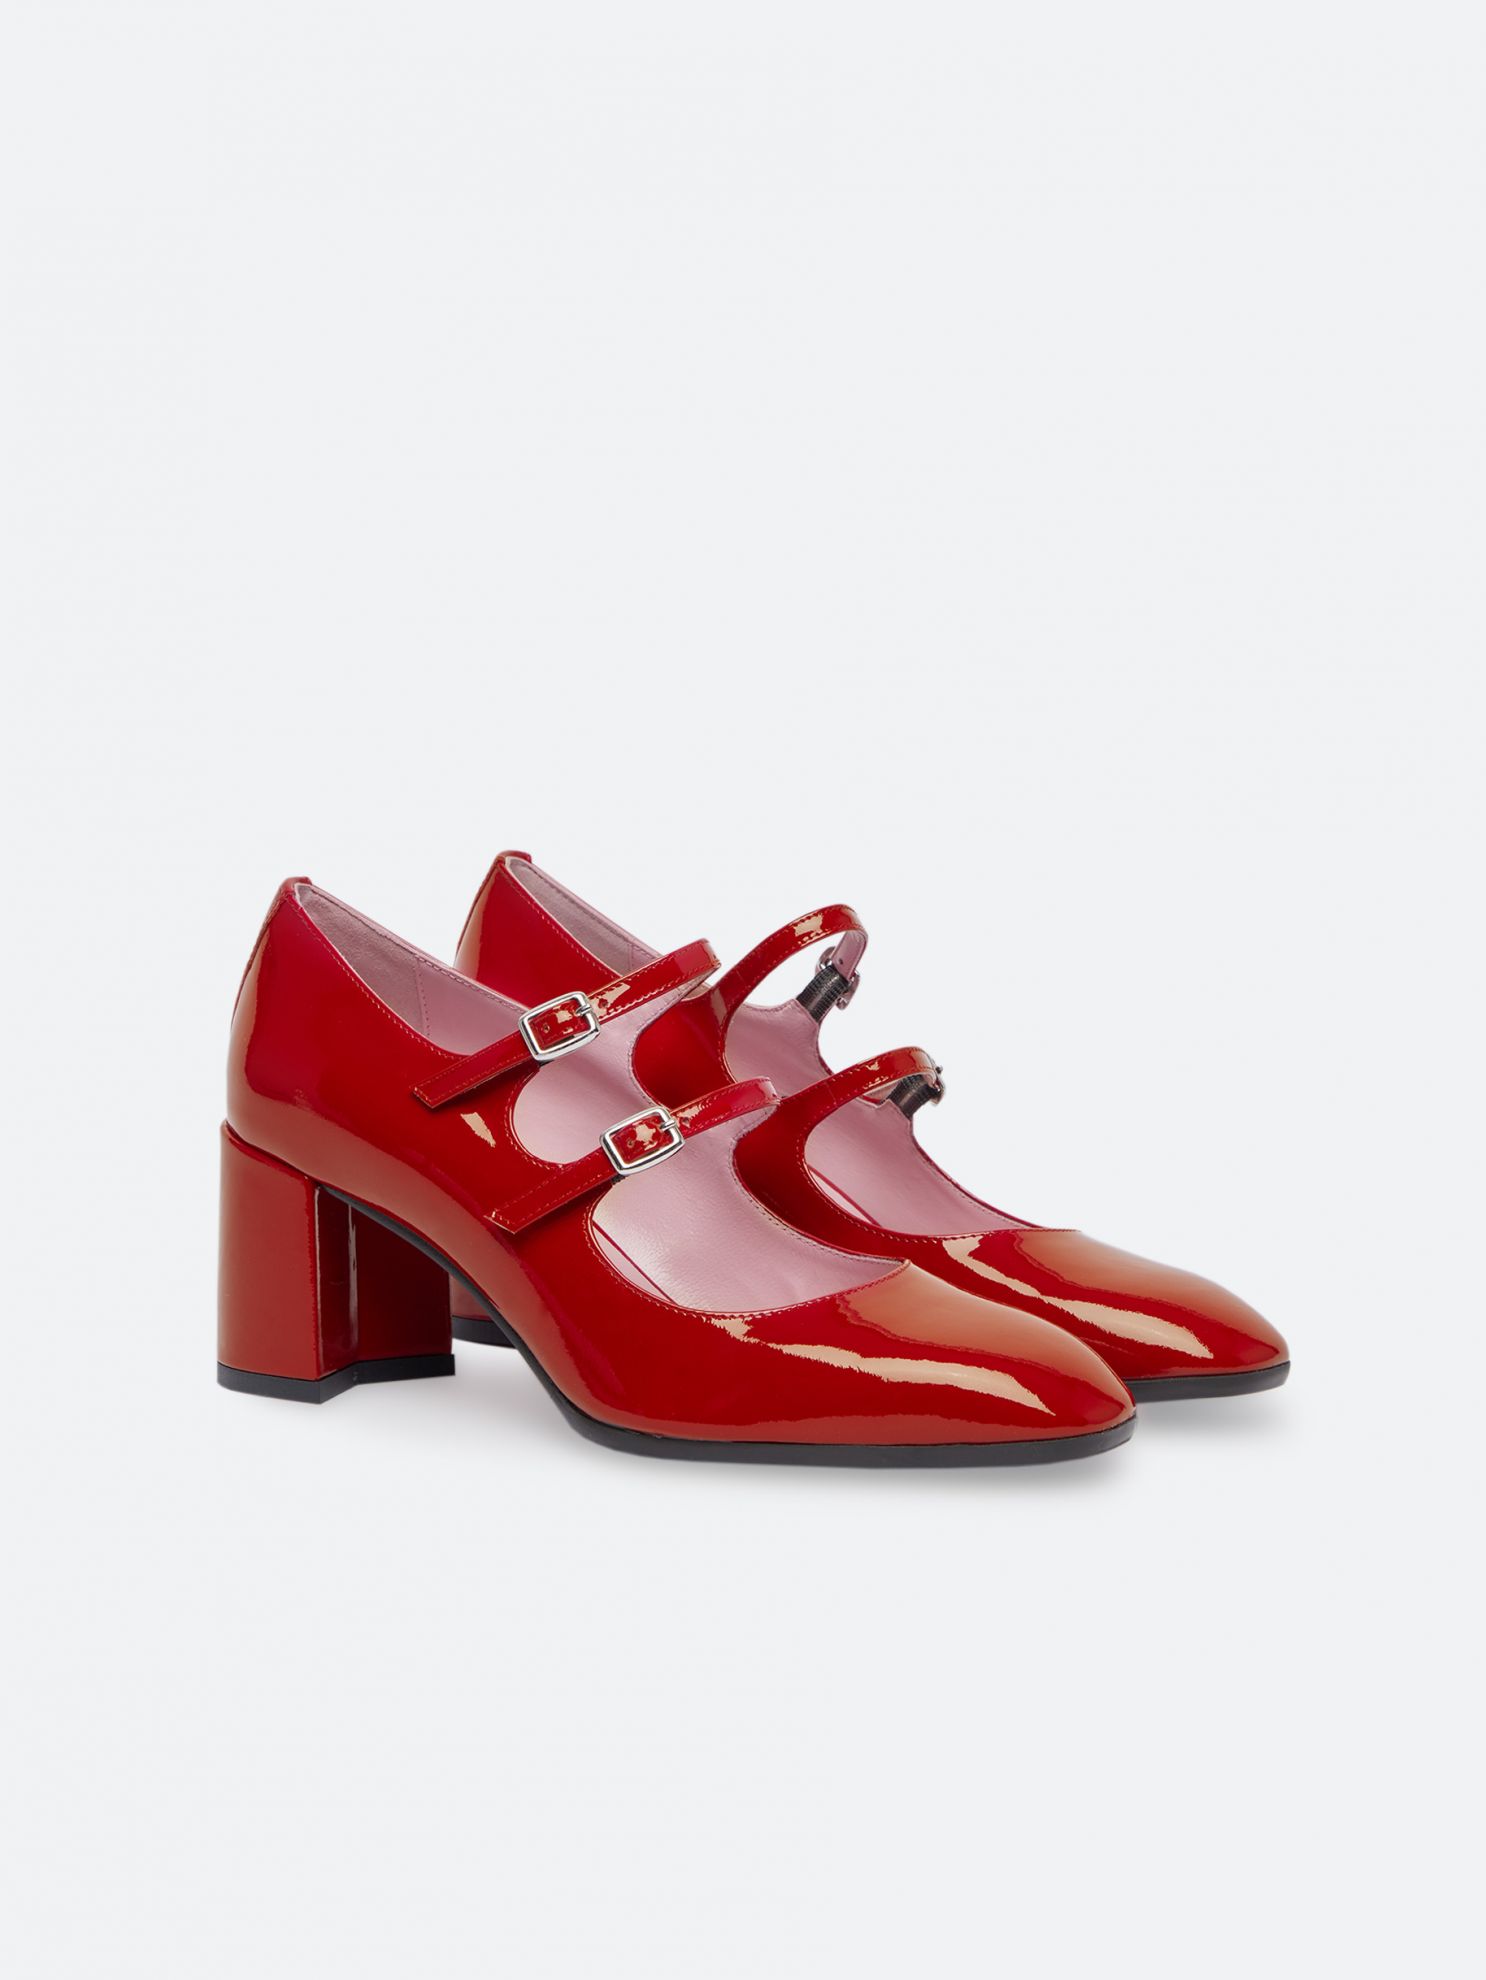 Alice Red Patent Leather Mary Janes Pumps Carel Paris Shoes